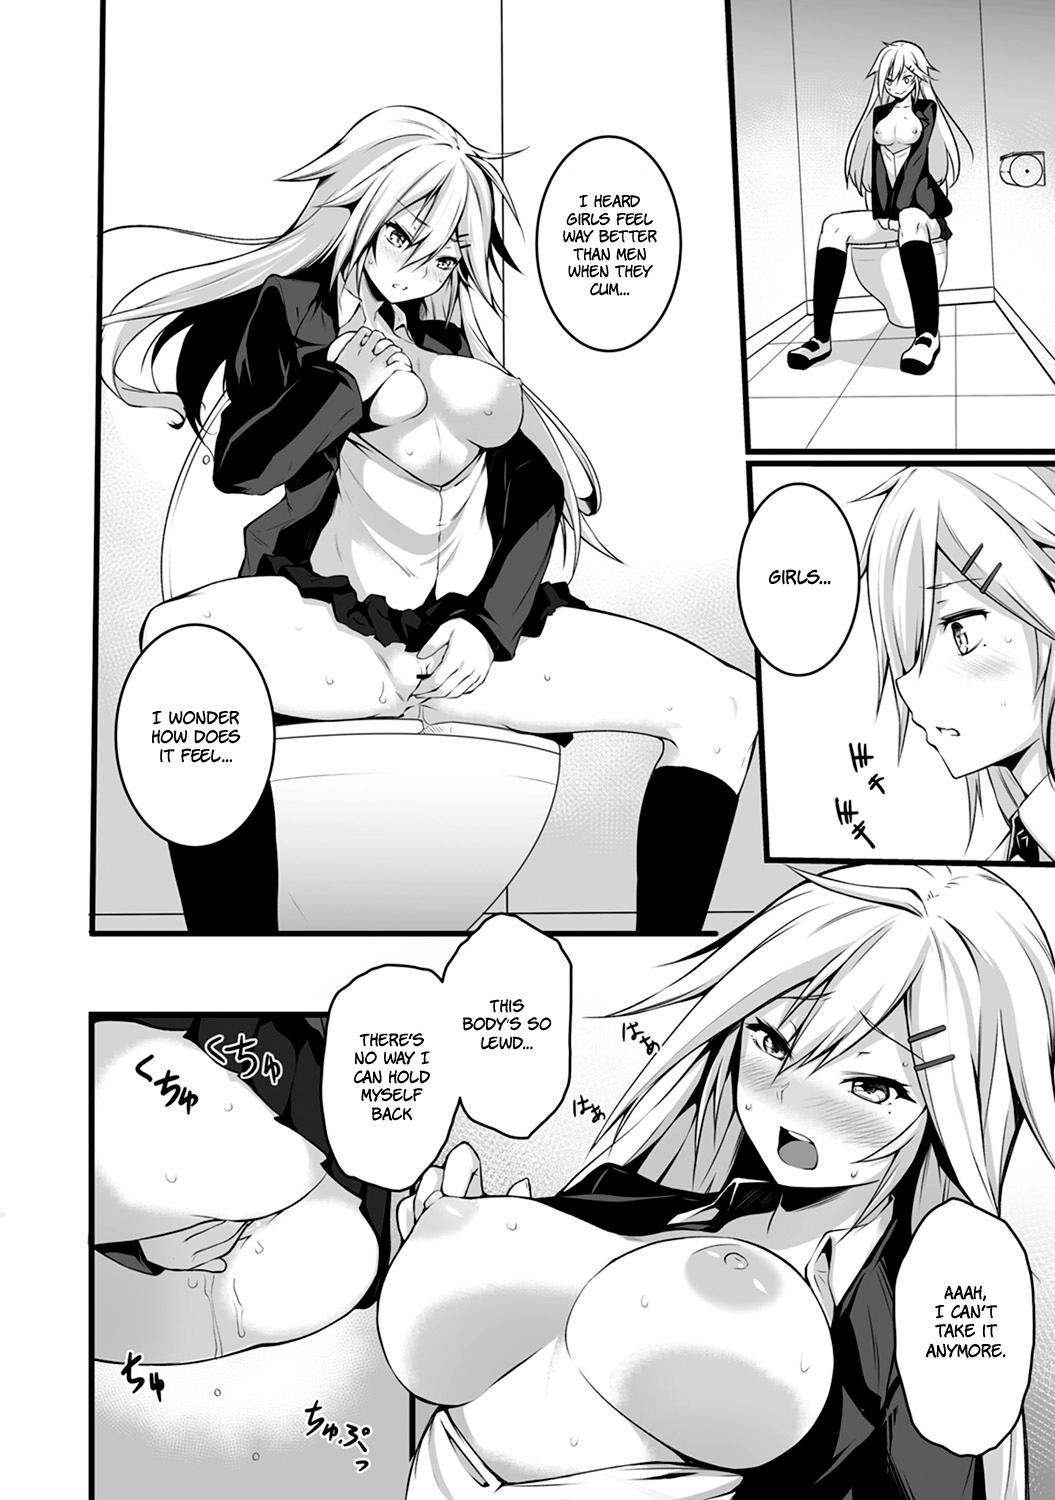 Transex Ore wa Kyou kara Cinderella Aite wa Otoko. Ore wa Onna!? | From now on, I’m Cinderella. My Partner is a Man and I’m a Woman!? Ch. 1-2 Butts - Page 9